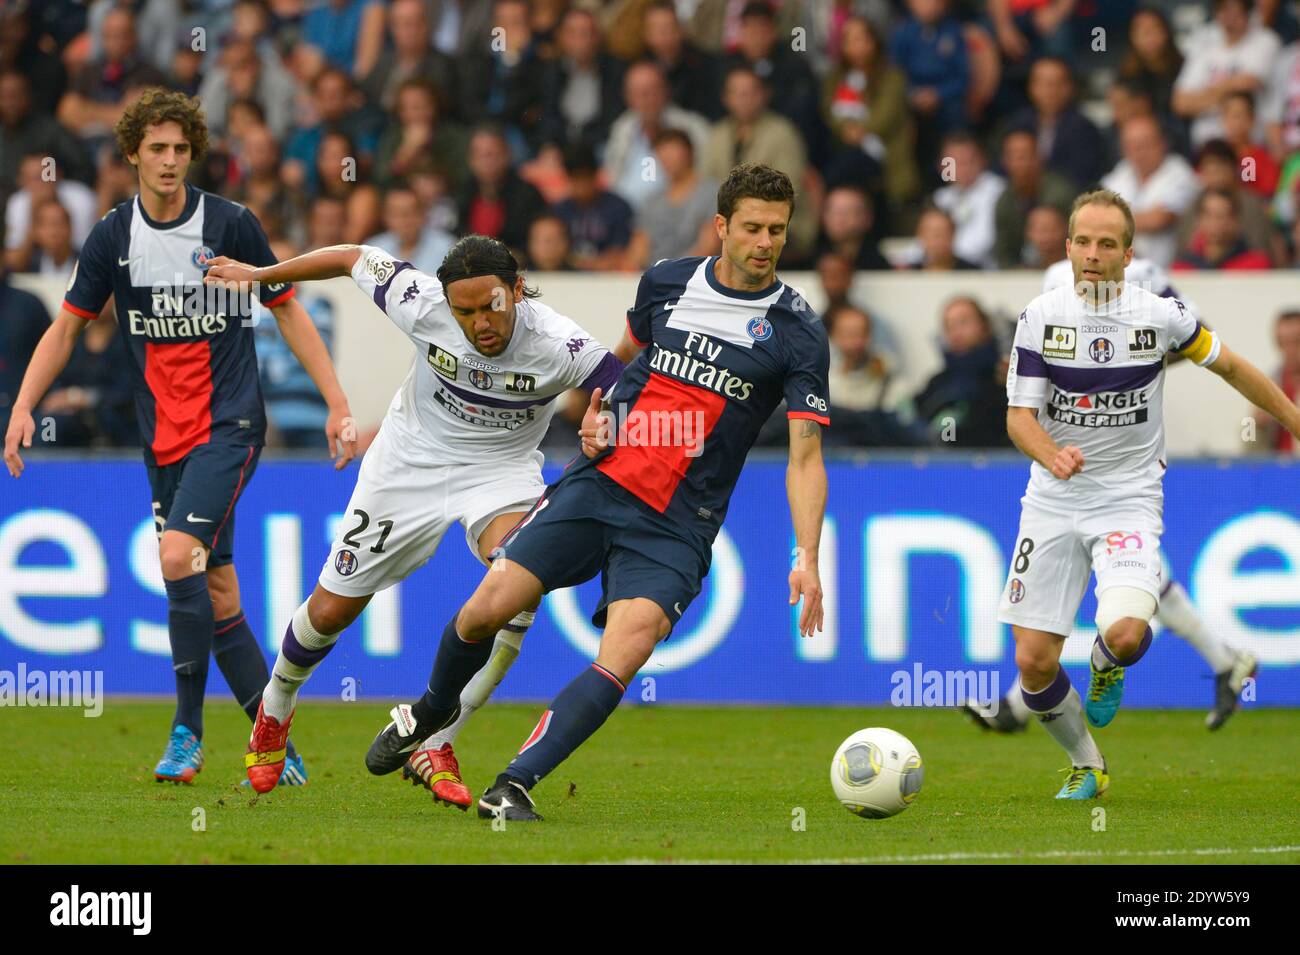 PSG's Thiago Motta battling Toulouse's Abel Aguilar during the French First League soccer match, PSG vs Toulouse in Paris, France, on September 28th, 2013. PSG won 2-0. Photo by Henri Szwarc/ABACAPRESS.COM Stock Photo